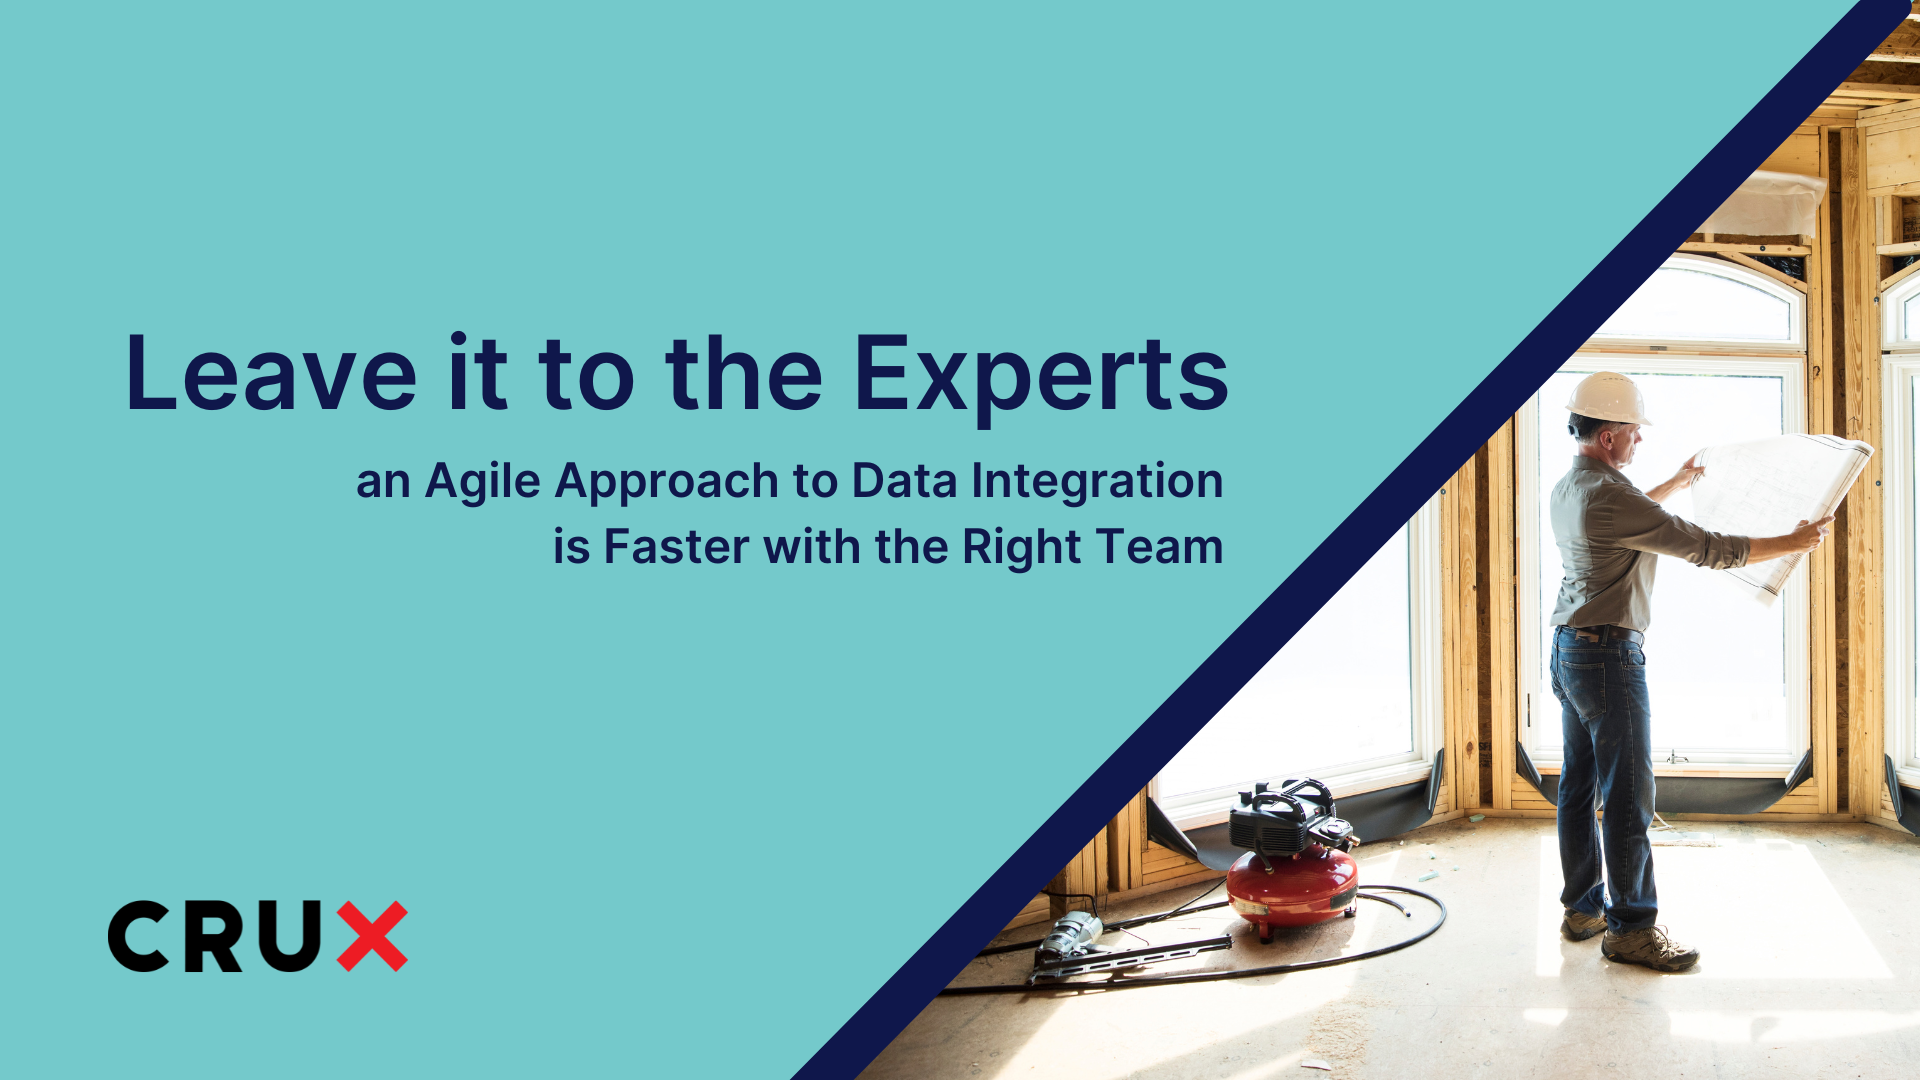 Leave it to the Experts: An Agile Approach to Data Integration is Faster with the Right Team